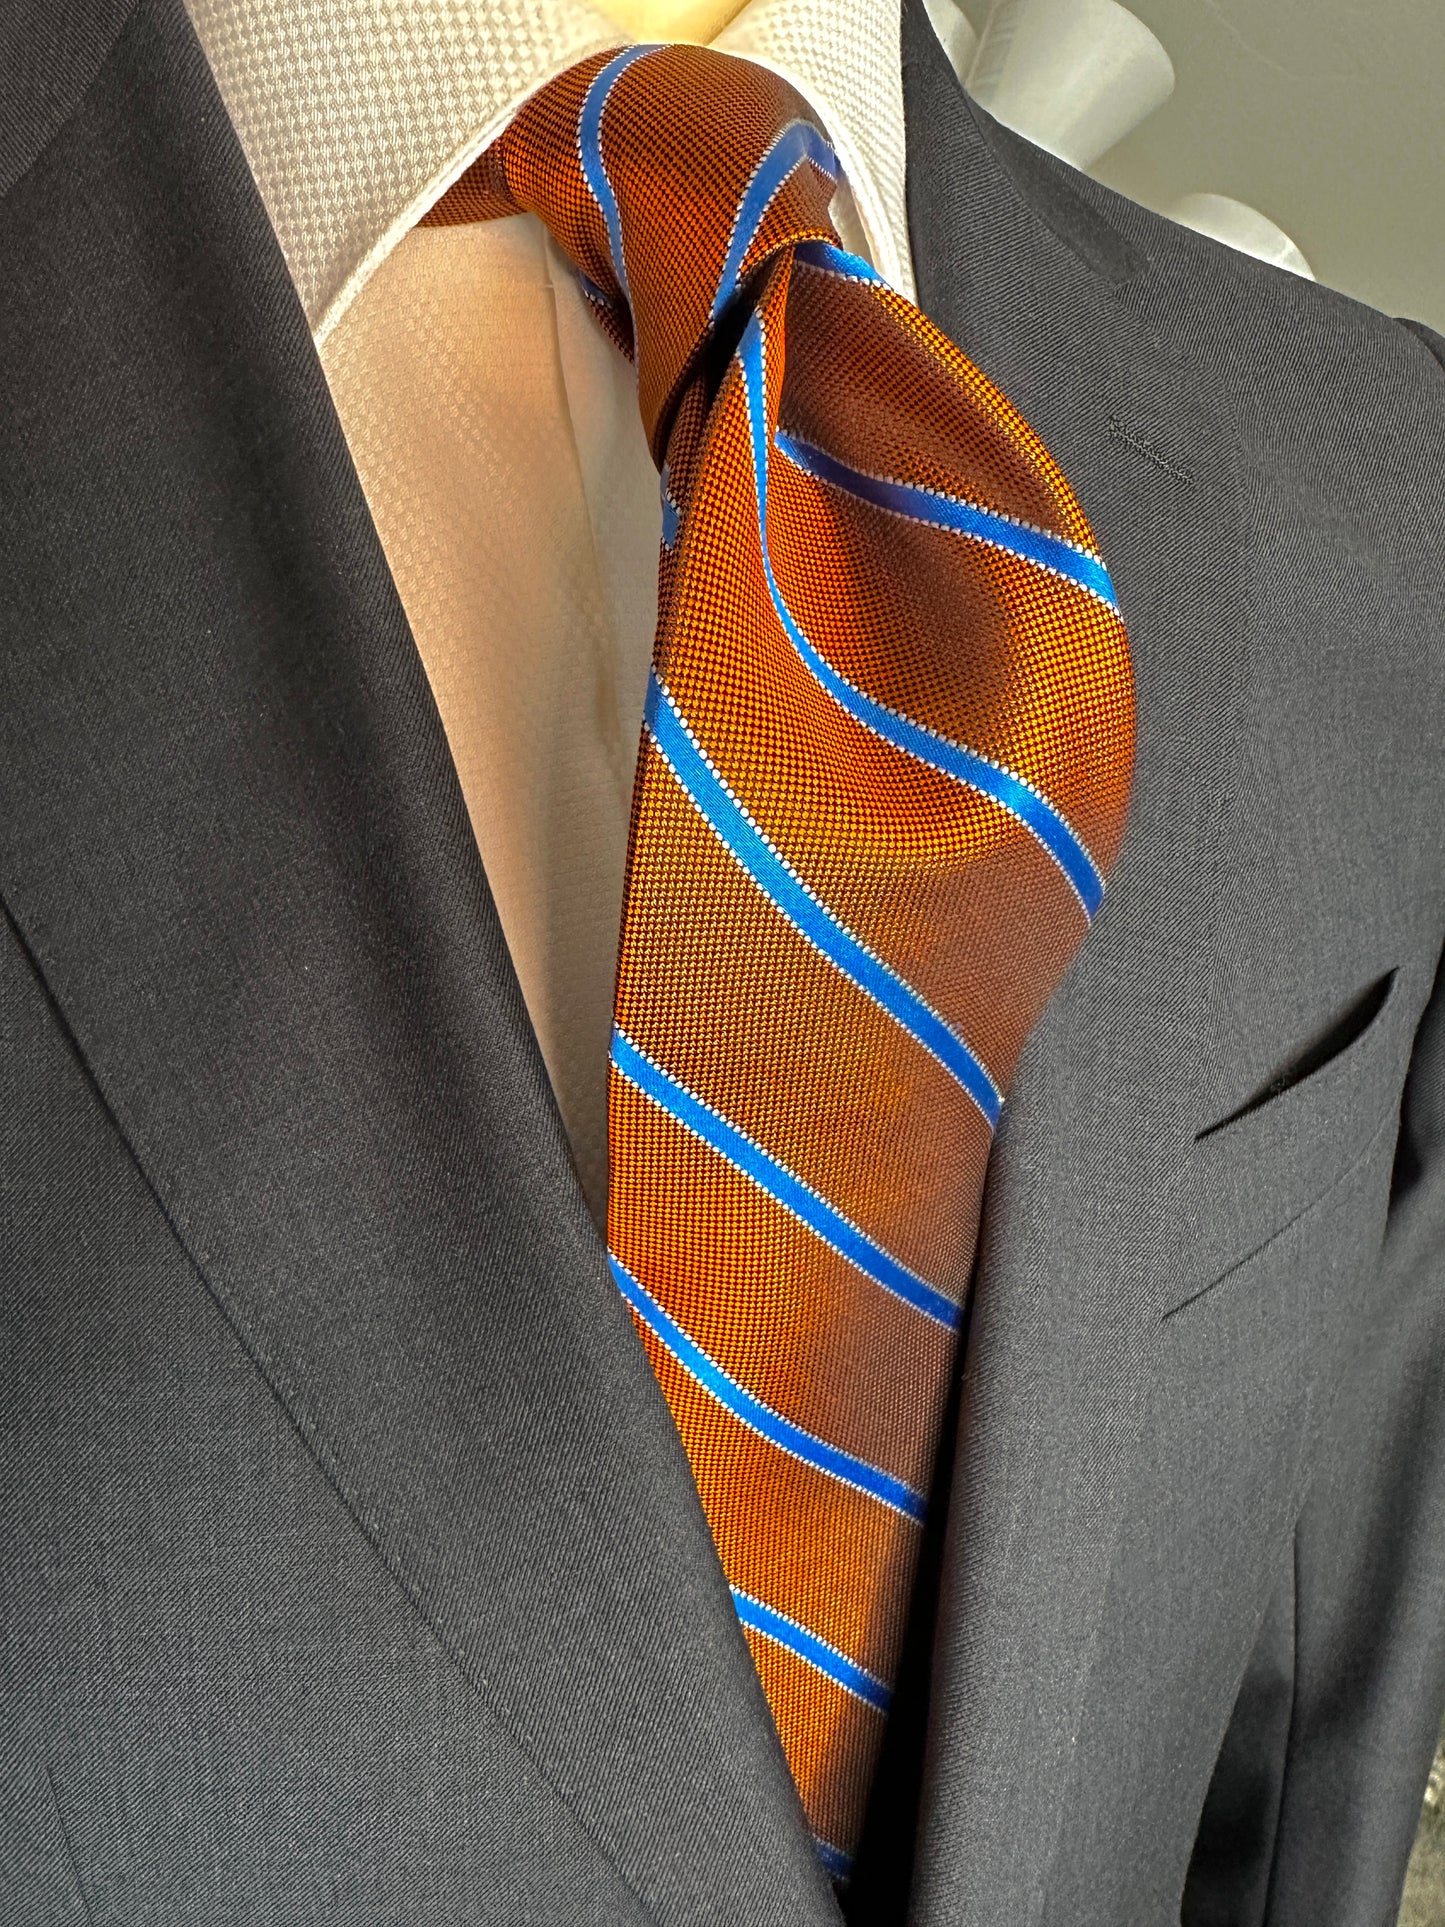 This beautiful burnt orange woven silk necktie is a stunning rich color with a baby blue stripe running through it. A perfect tie for any season and matching with a multitude of suit colors and patterns, this is a very versatile tie. In Italy, the mini plaid shirt with striped tie is a sophisticated ensemble. 